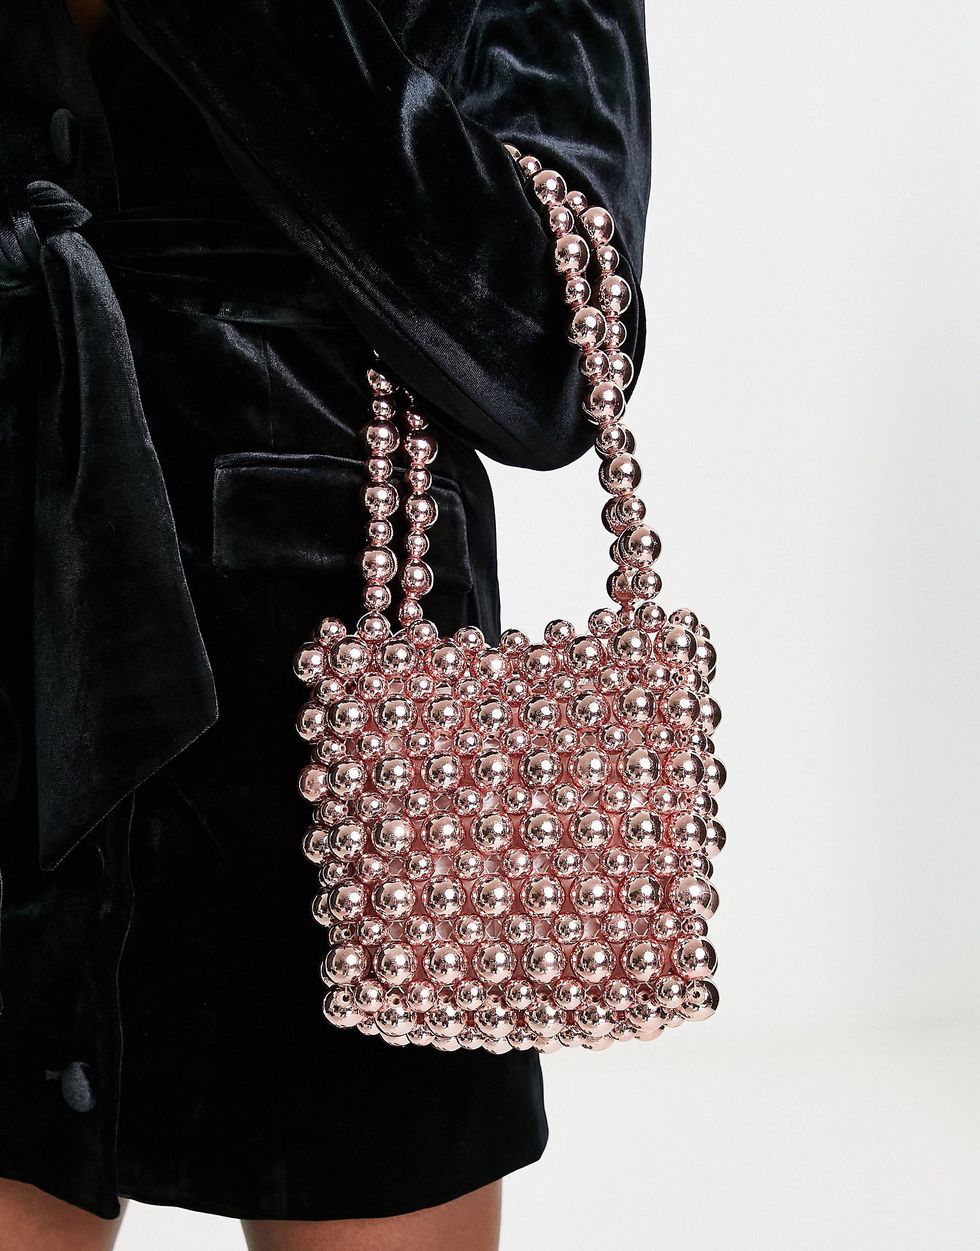 Shoulder bag with ball beads in pink